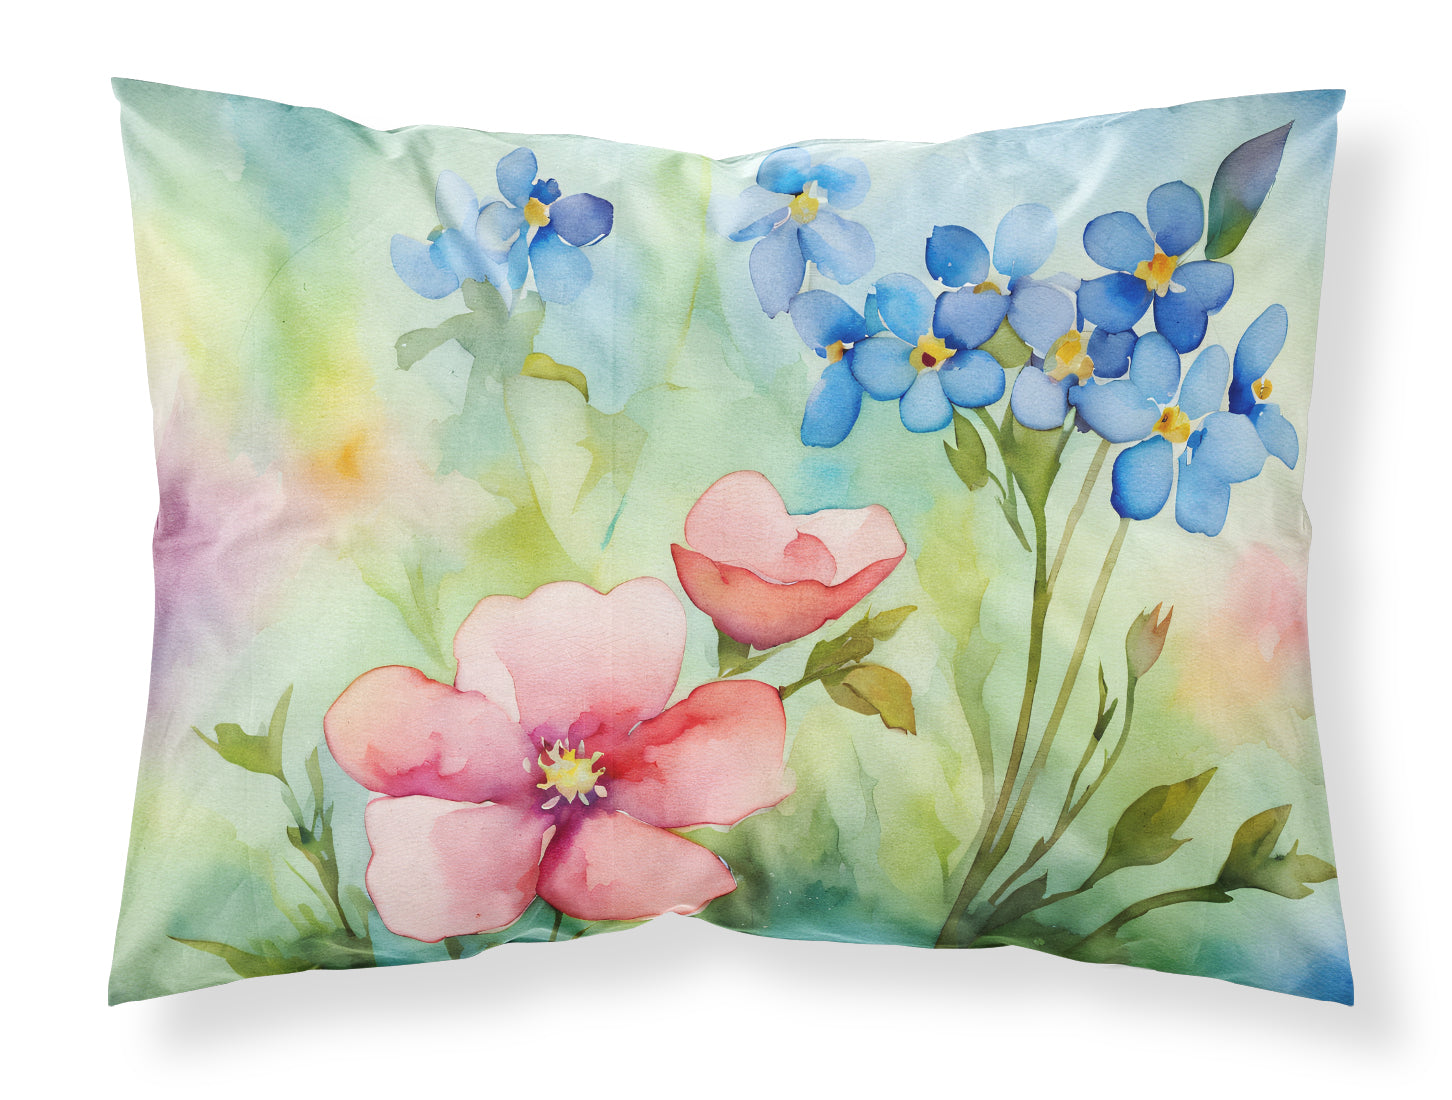 Buy this Alaska Forget-me-nots in Watercolor Fabric Standard Pillowcase